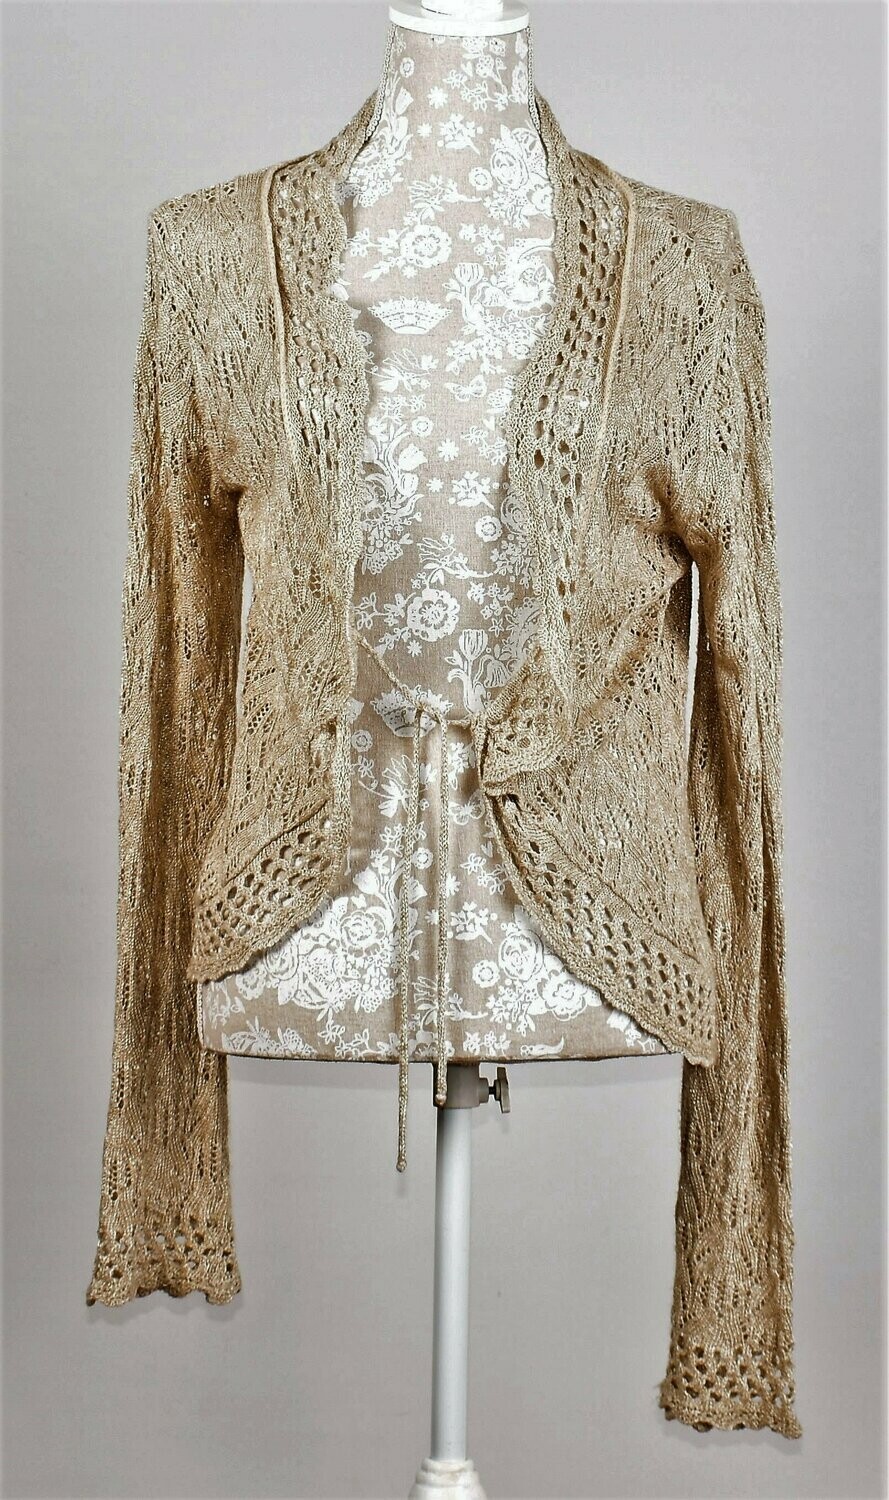 Gold & Beige Crocheted Style Cardigan by Per Una